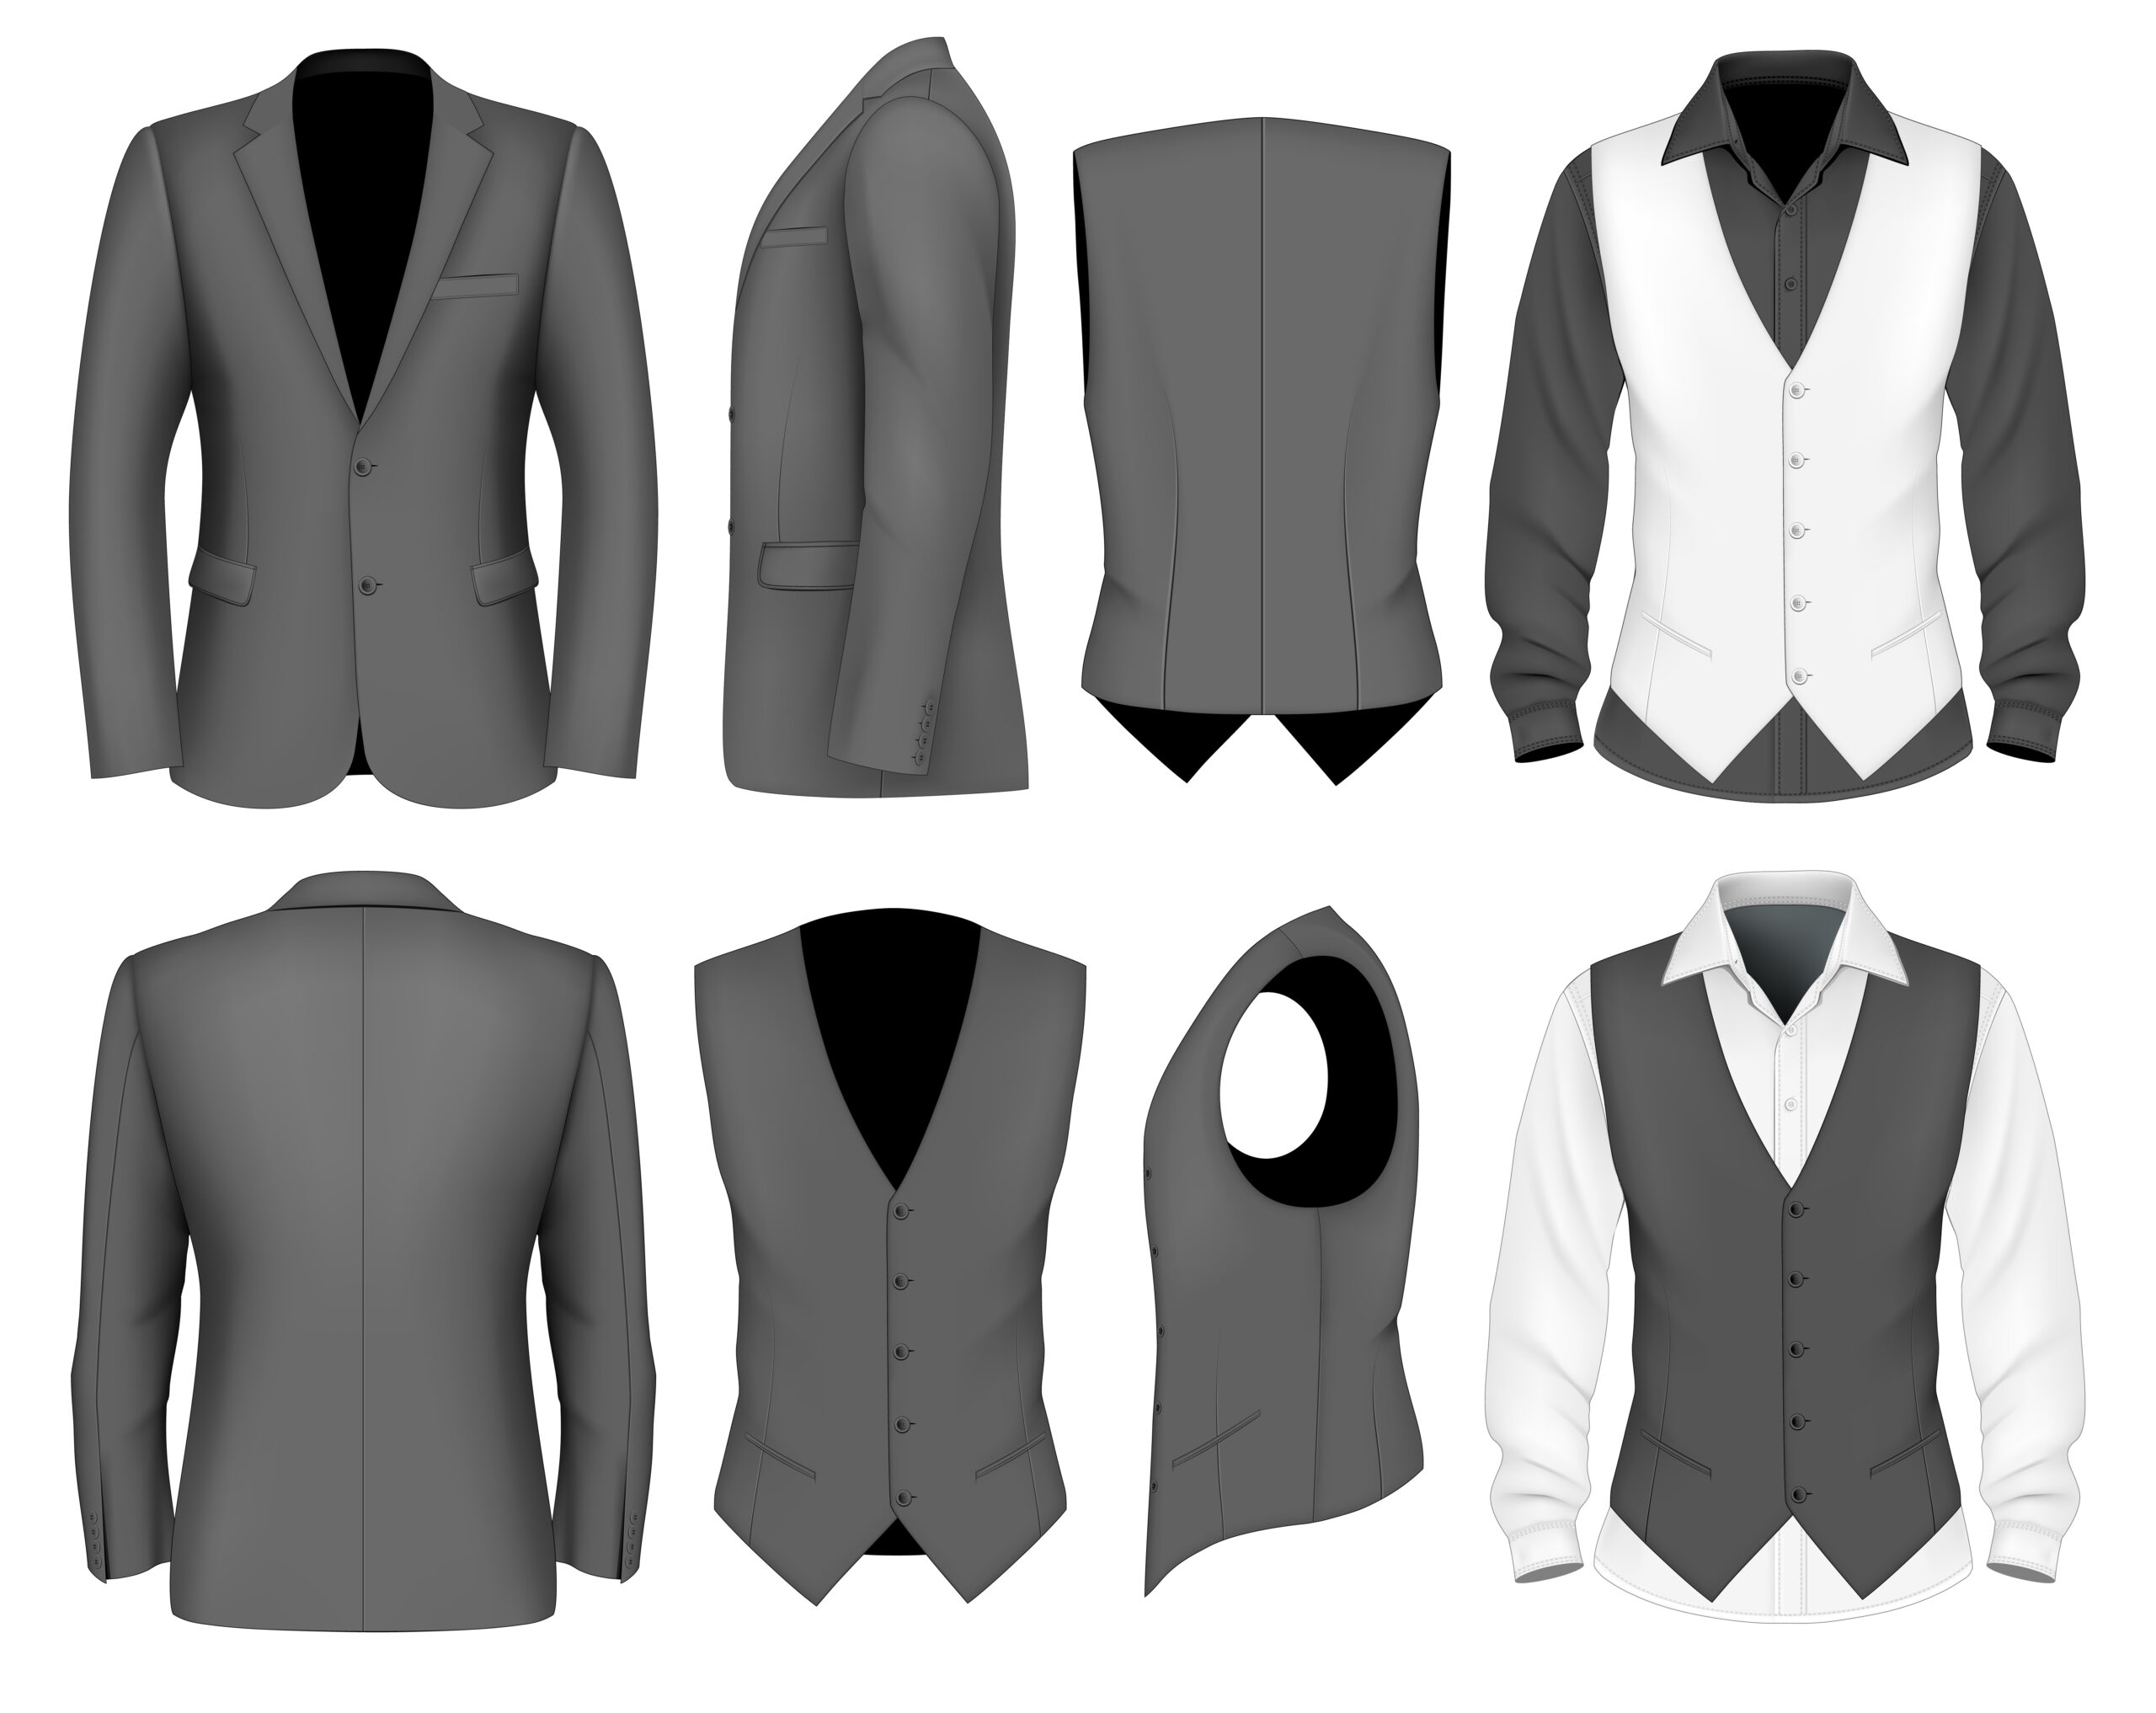 Formal,Business,Suits,Jacket,And,Waistcoat,For,Men.,Vector,Illustration.